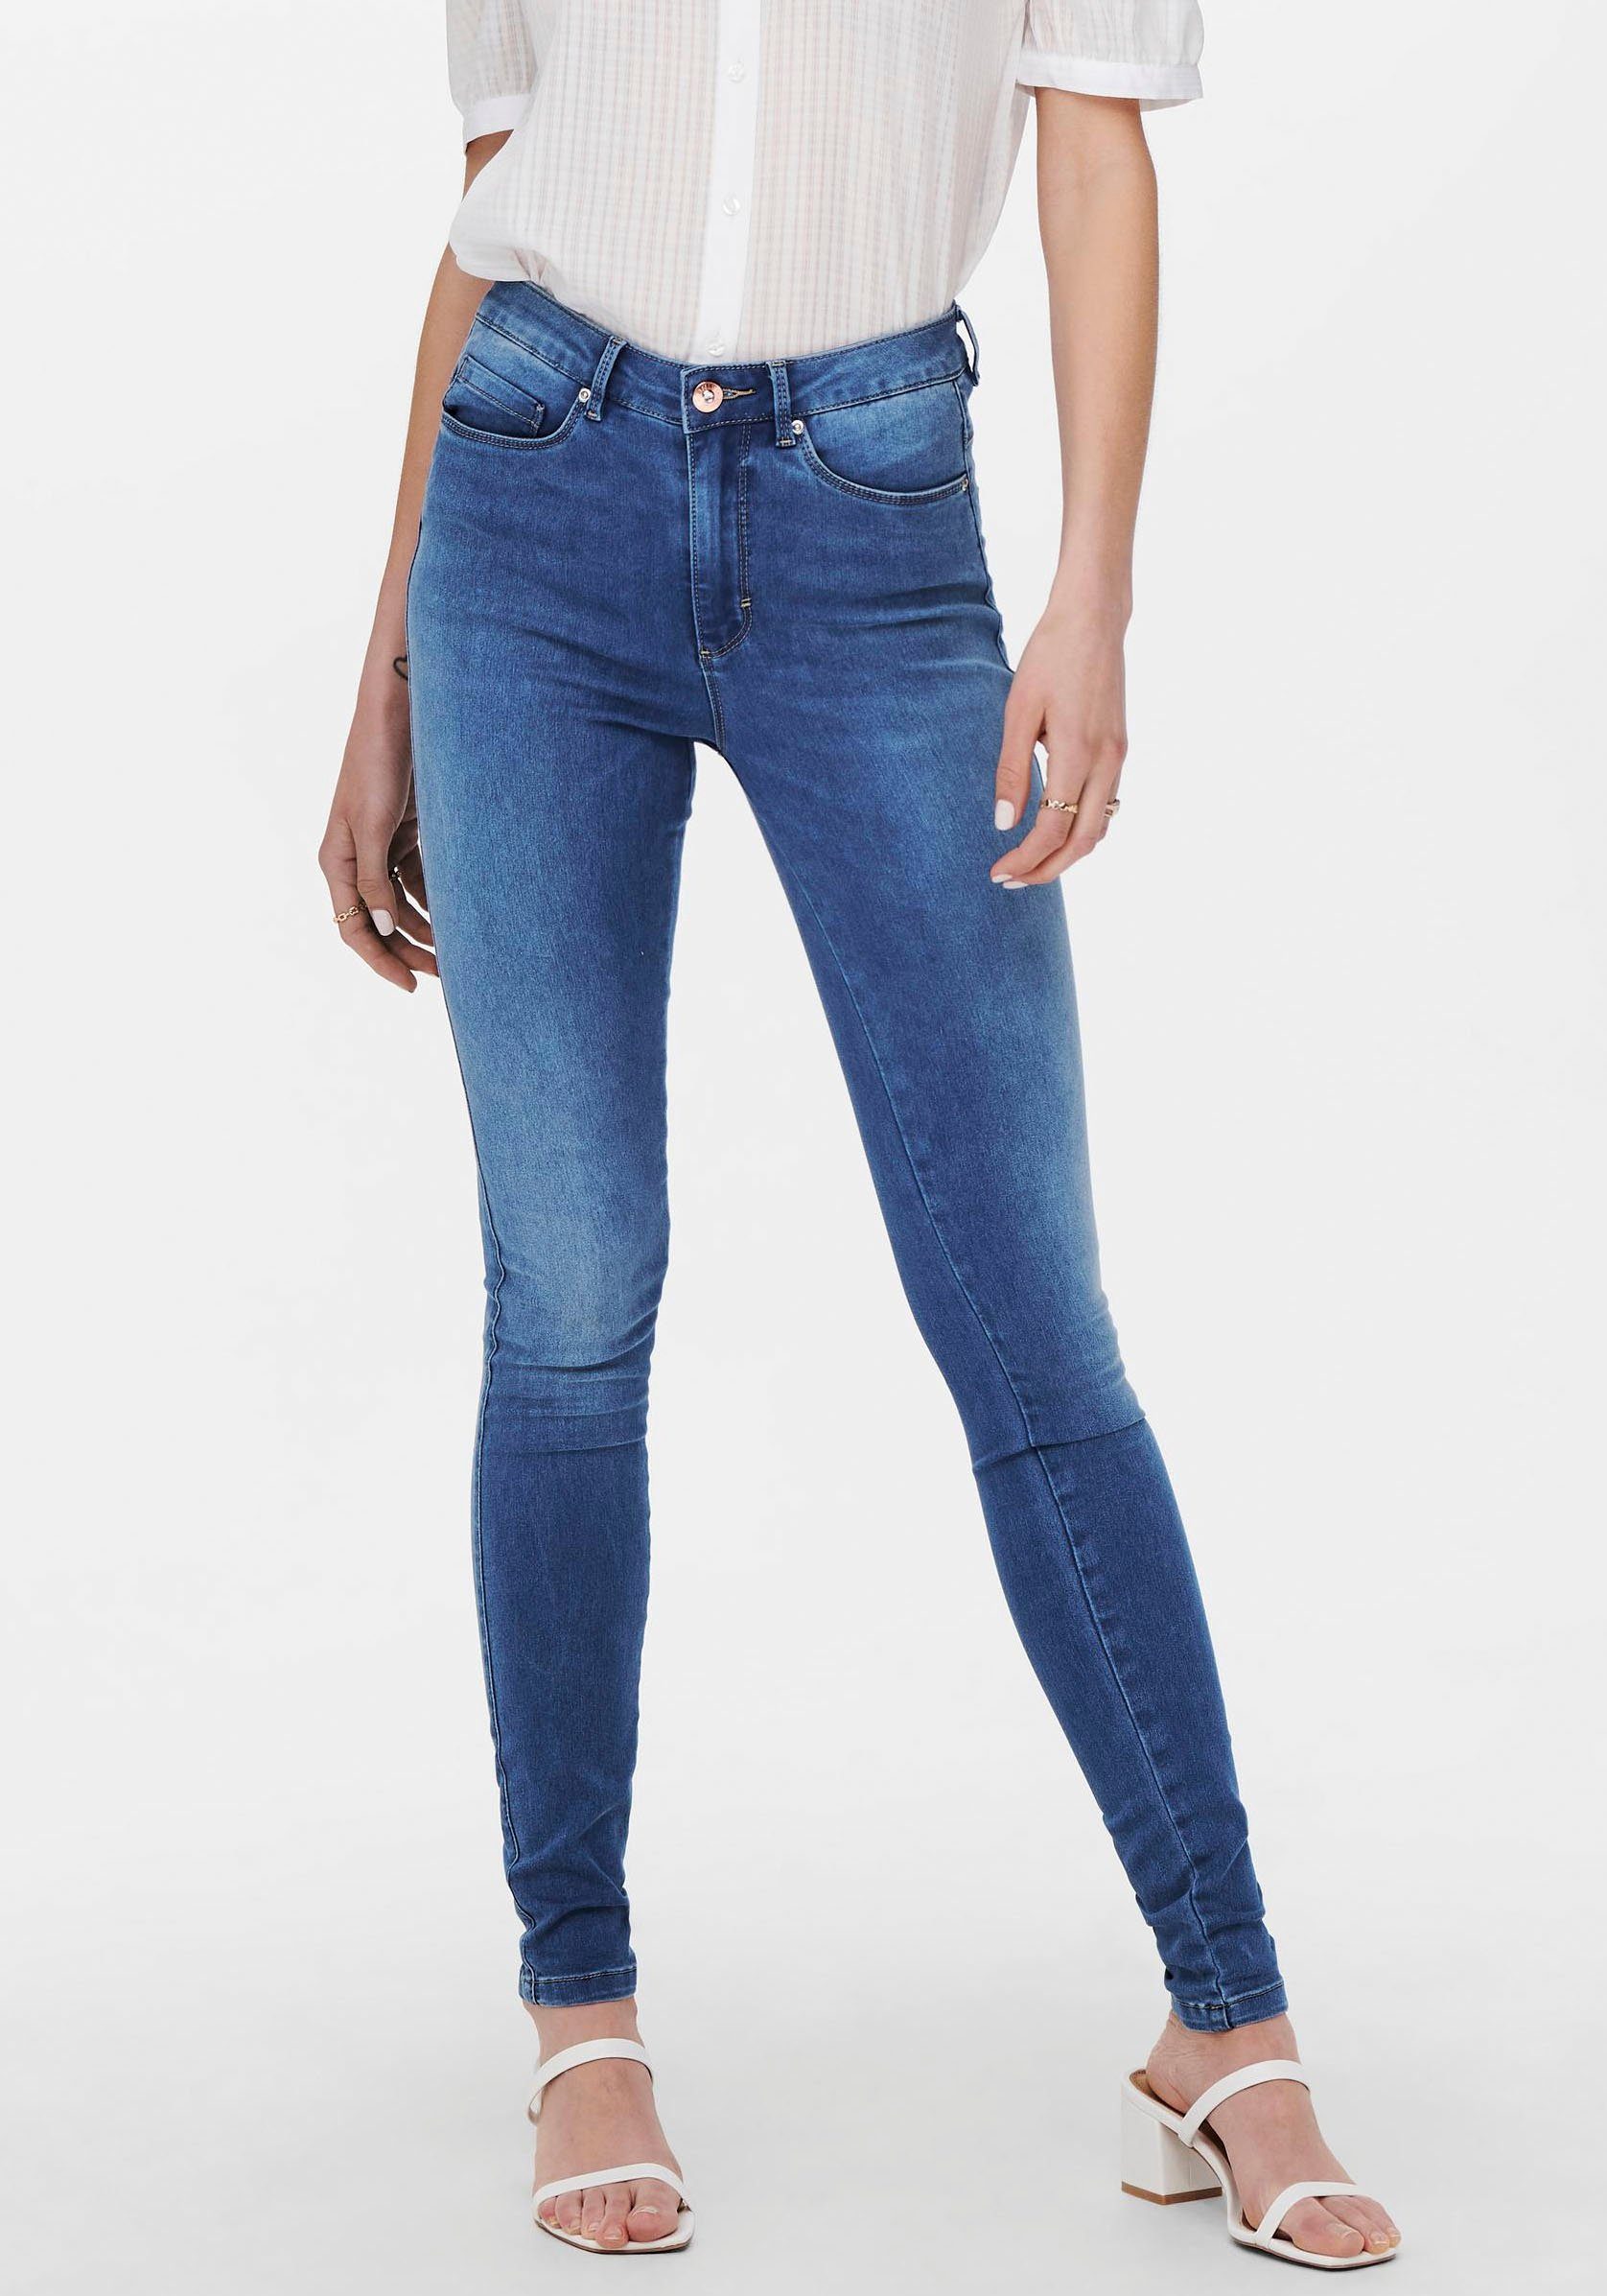 ONLROYAL DNM ONLY HW SK LIFE Skinny-fit-Jeans